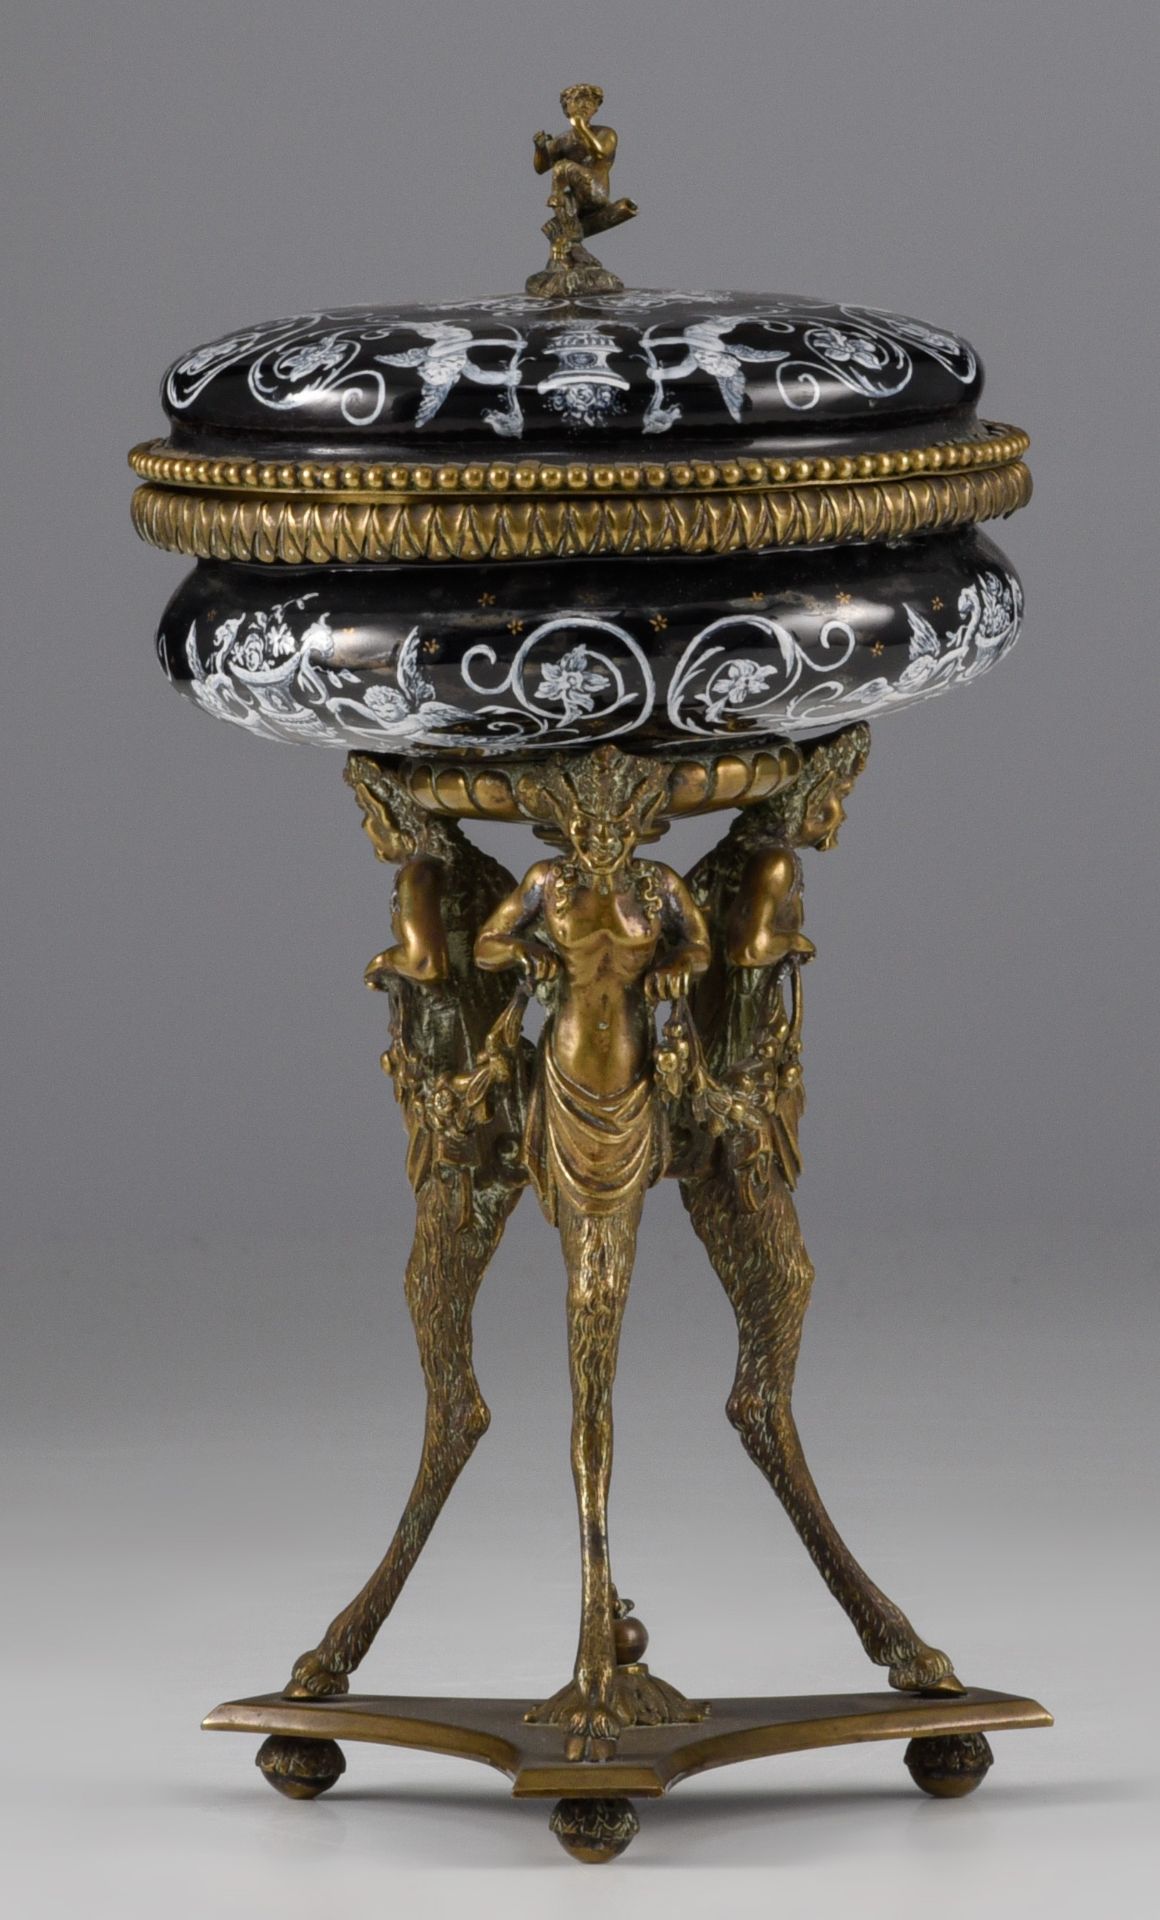 A Limoges enamel box with cover and a tazza with cover, Napoleon III period, H 8 - 23 cm - Image 9 of 16